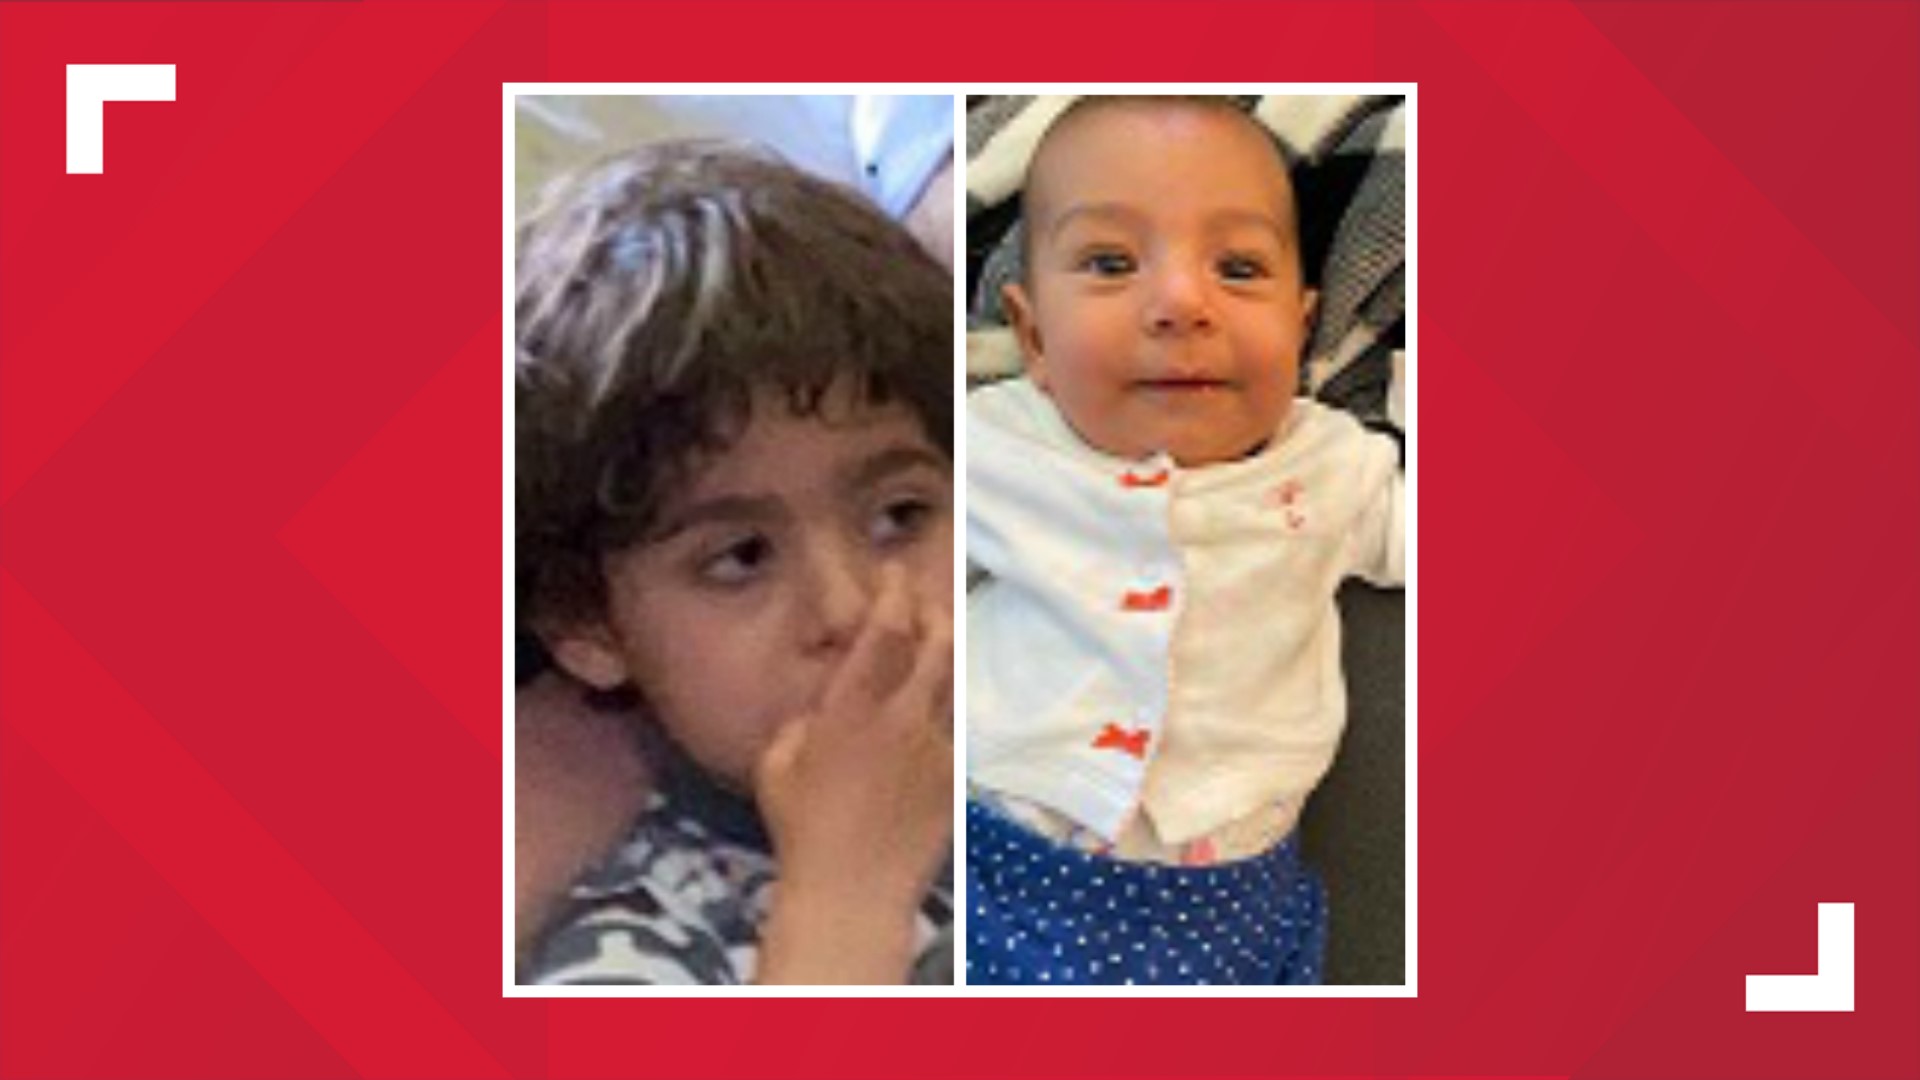 Police are looking for two children in the Riverside area